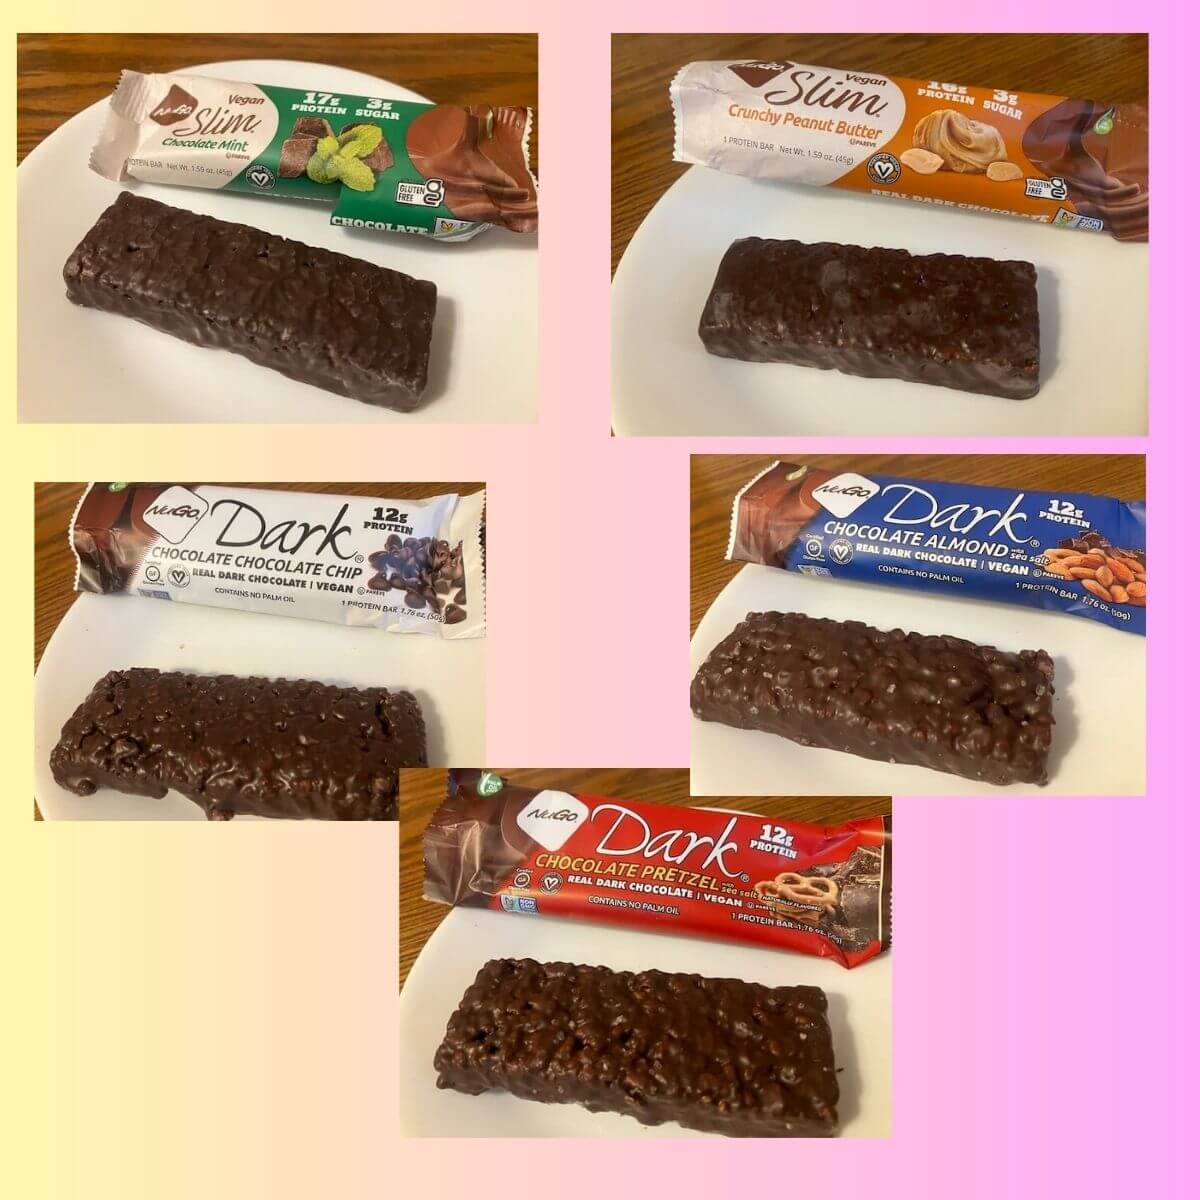 Pictures of Various Nugo Bars packages beside the bars unwrapped. Flavors include: nugo slim chocolate mint, nugo slim crunchy peanut butter, nugo dark chocolate chocolate chip, nugo dark chocolate almond, and nugo dark chocolate pretzel.